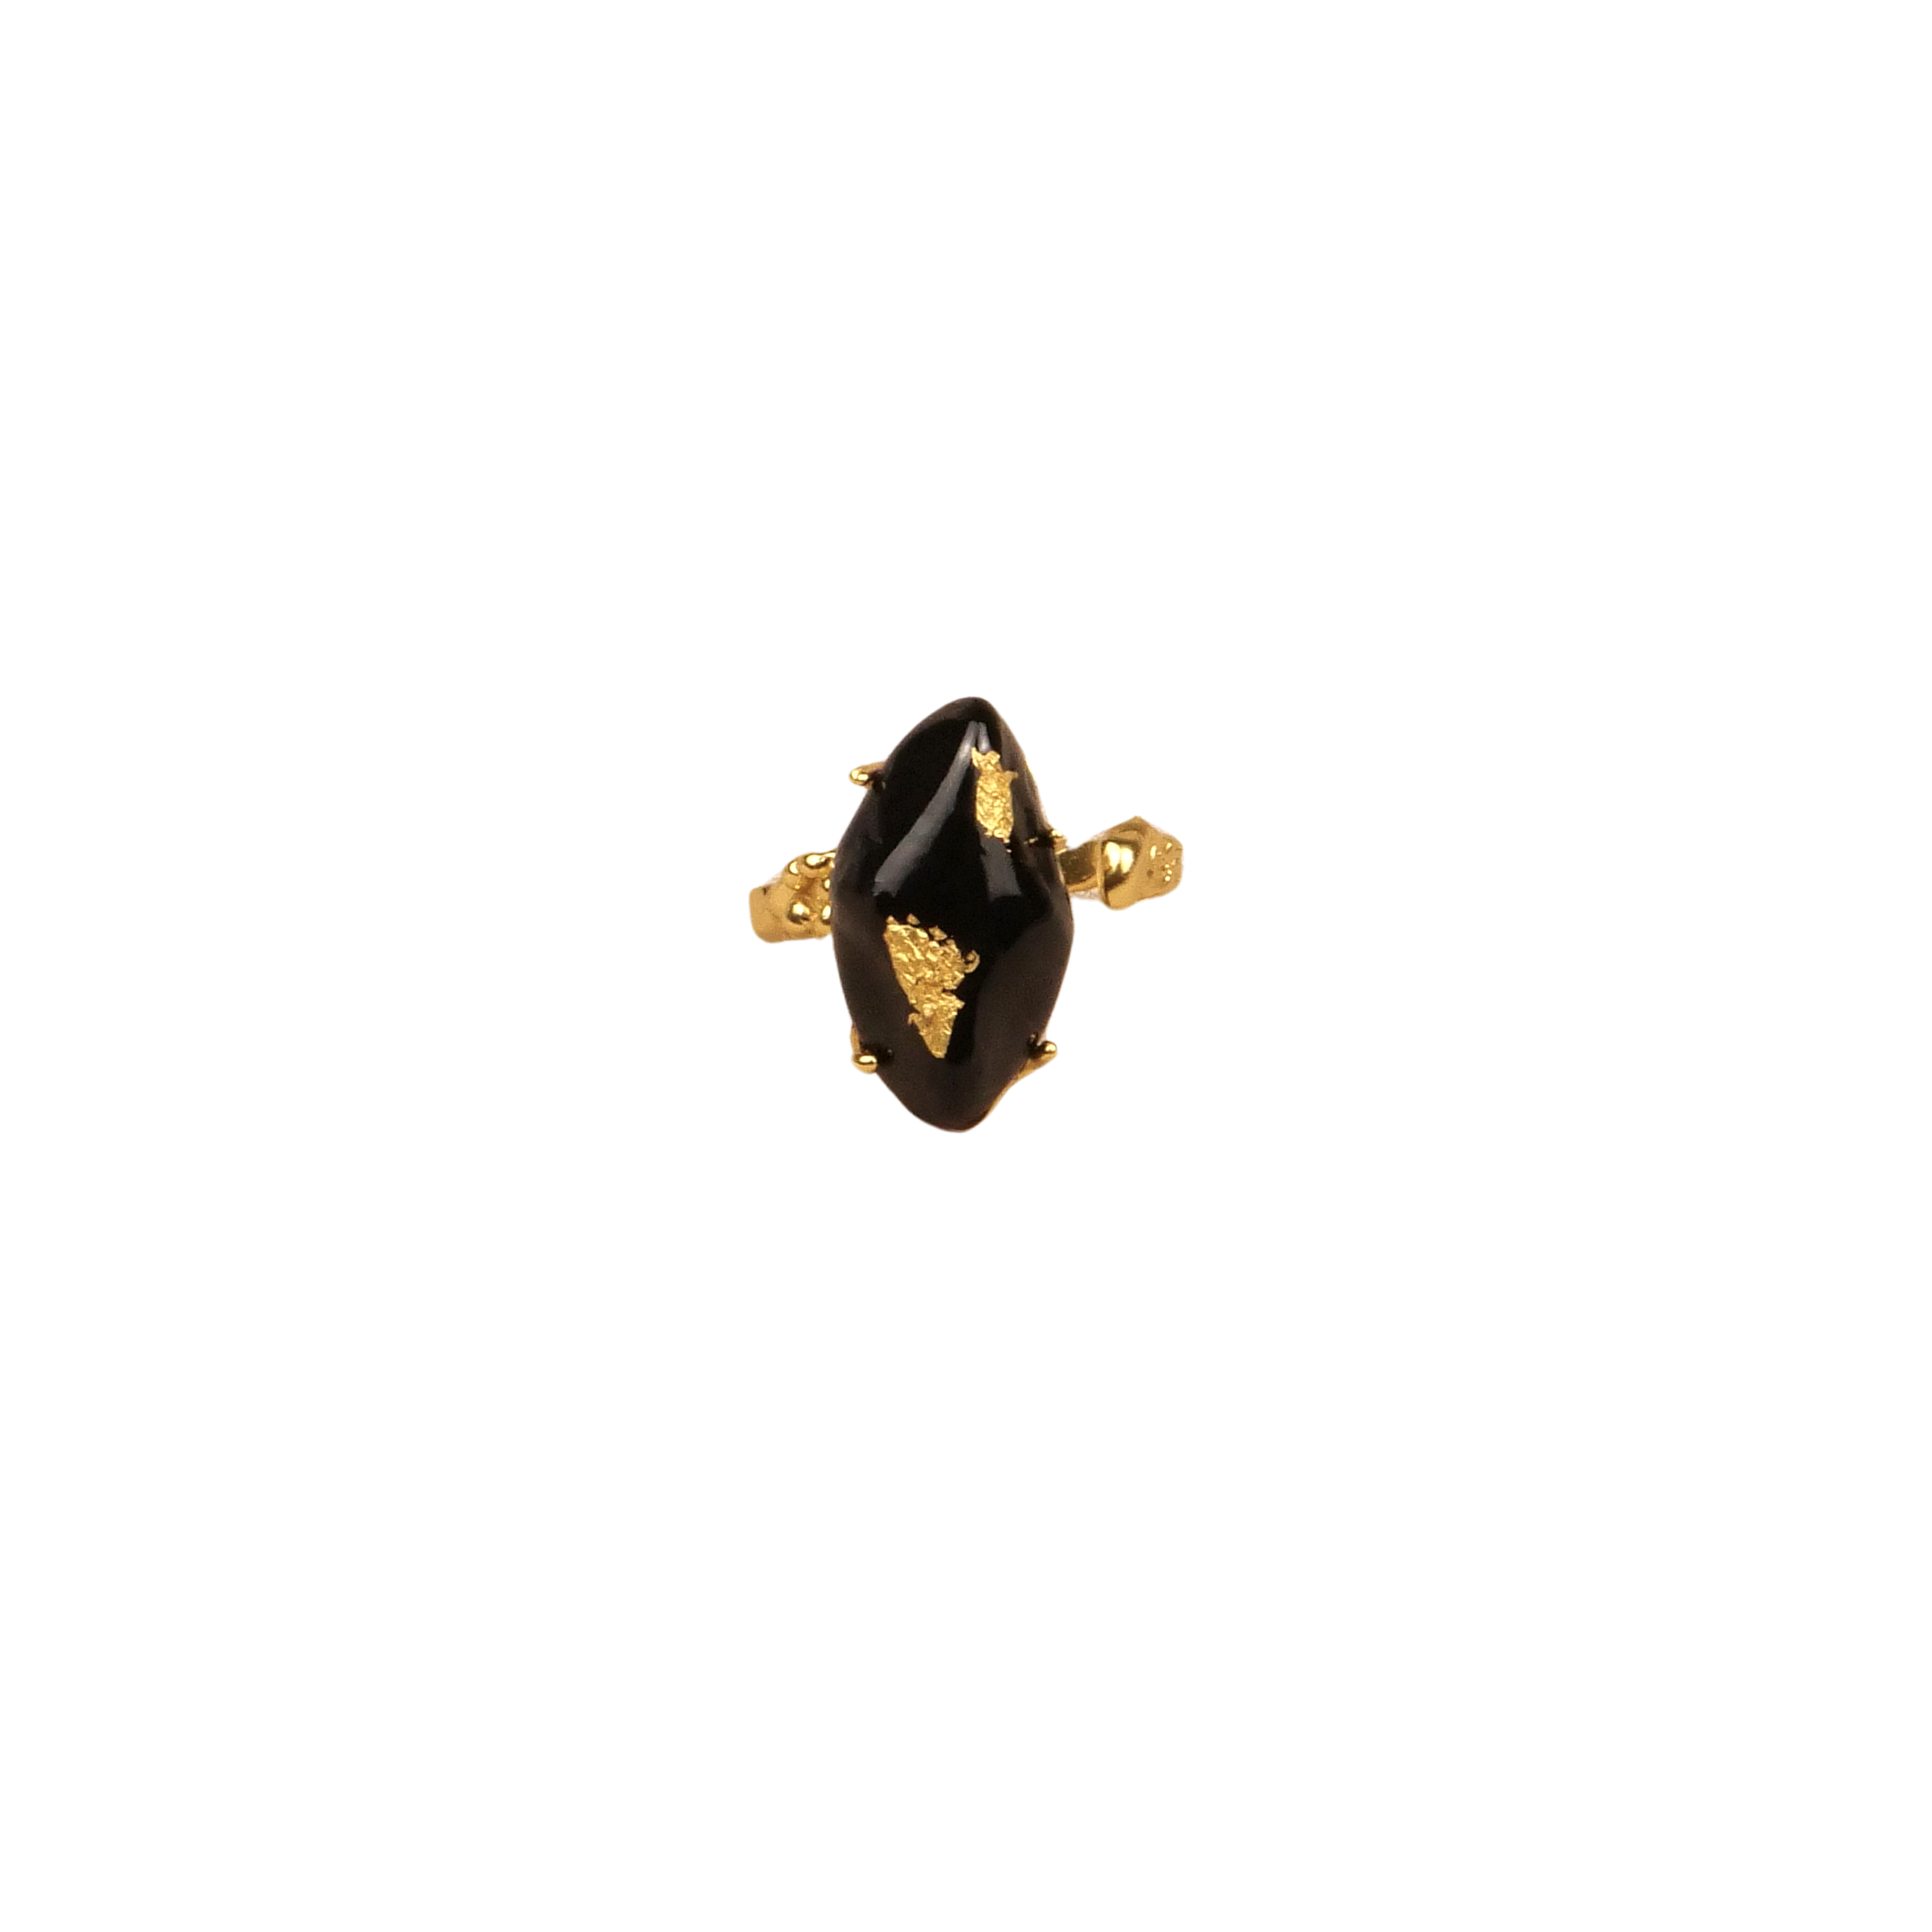 Hanying Ceramic Stone Ring With Gold Painting